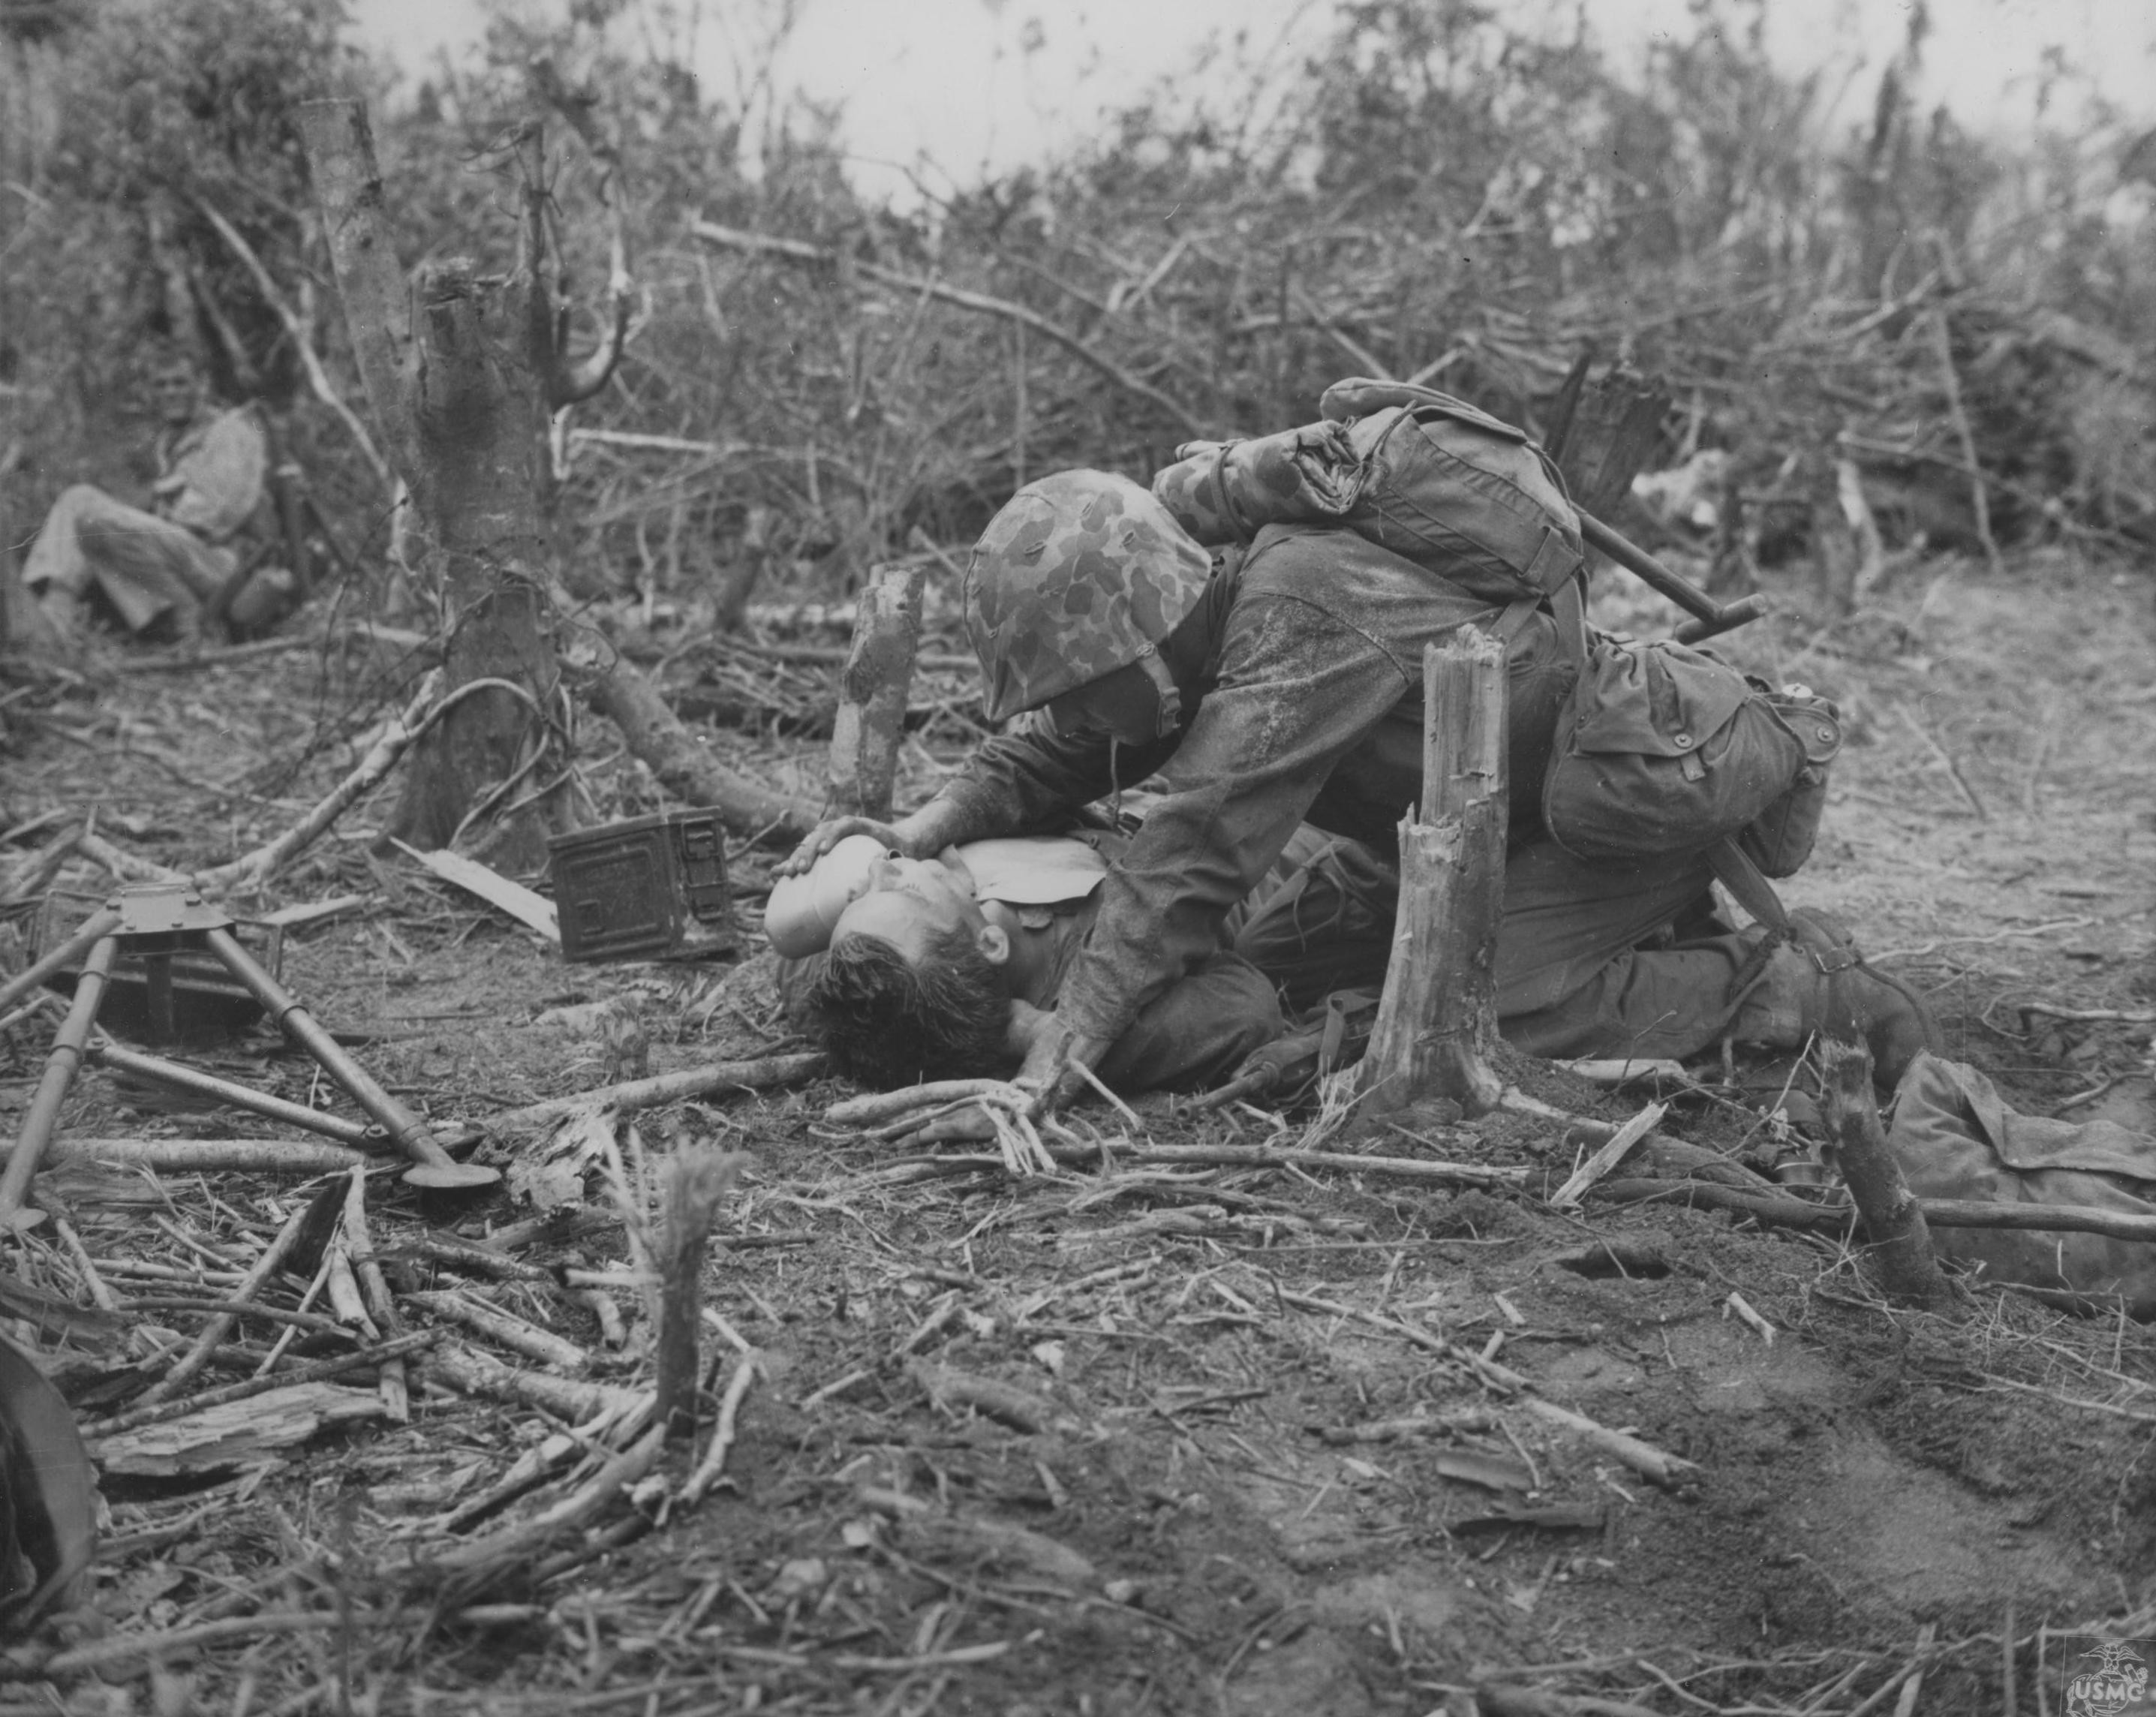 An US Marine giving his wounded comrade a drink of water from a canteen, Peleliu, Palau Islands, Sep 1944